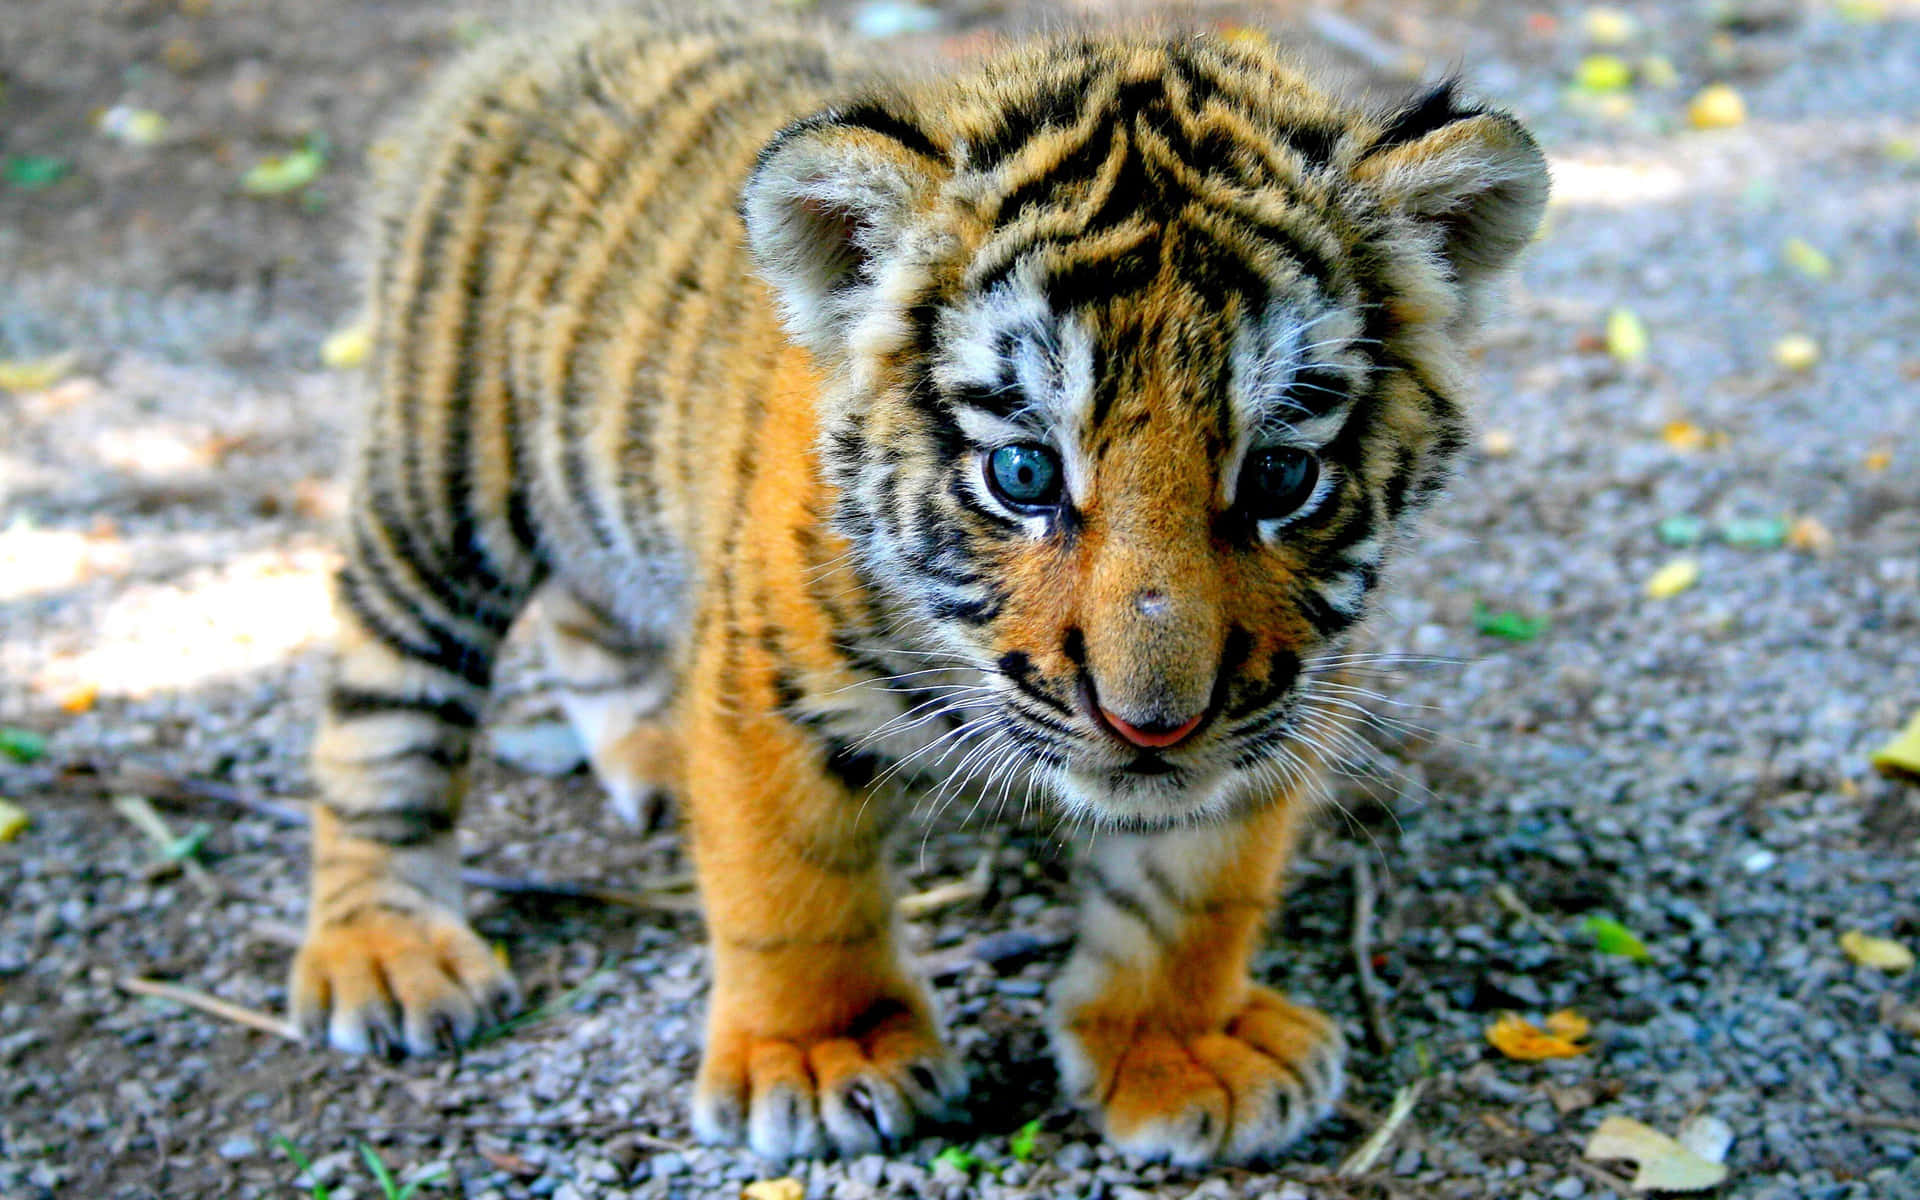 Adorable baby tiger exploring the great outdoors